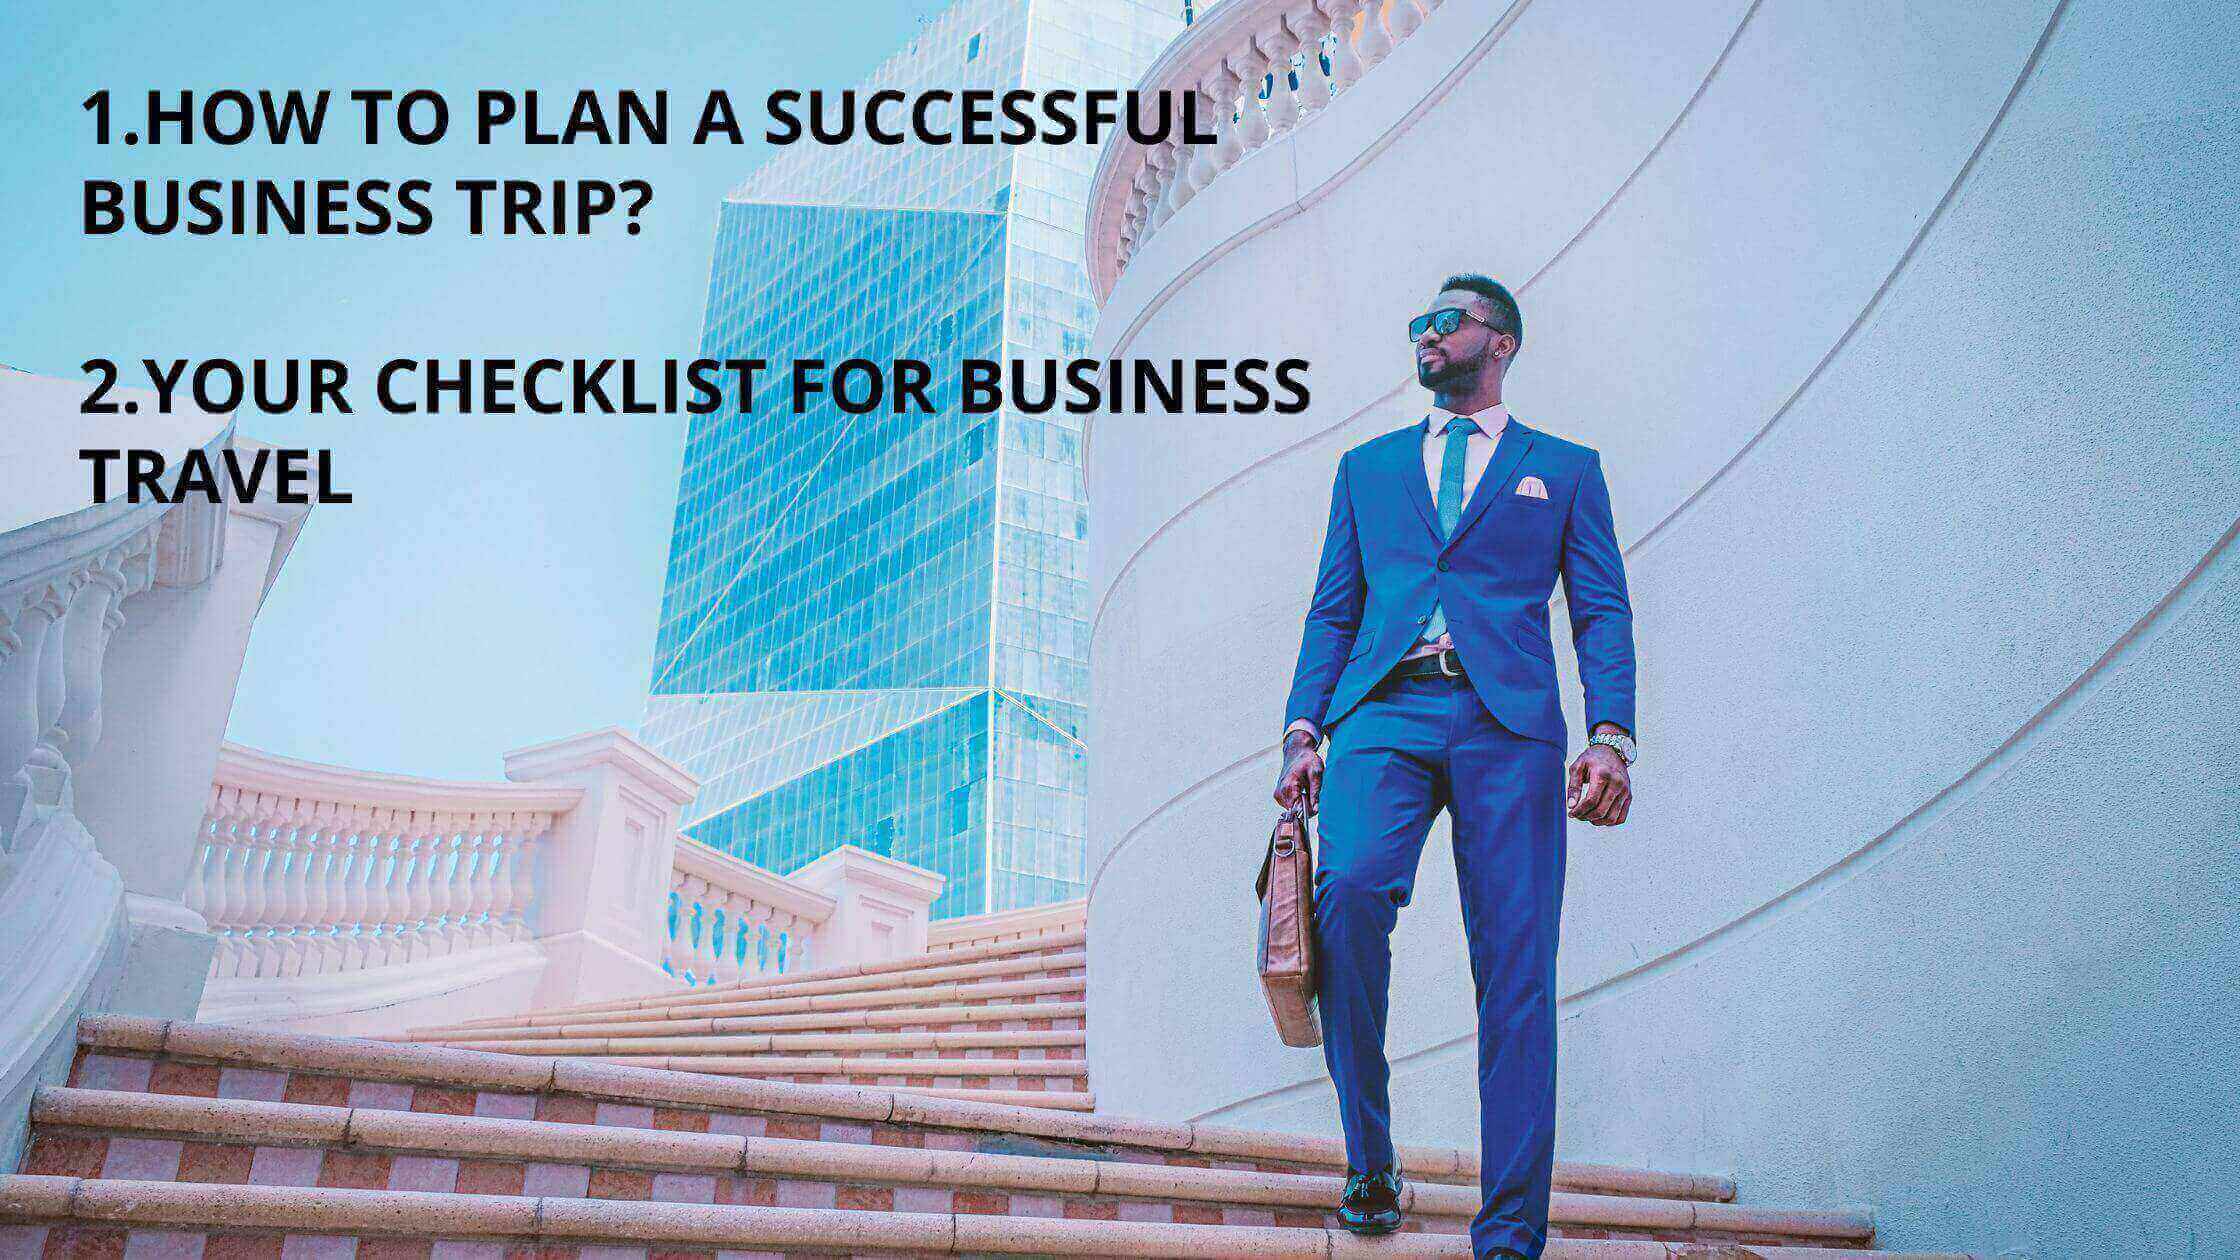 How to Plan a Successful Business Trip?